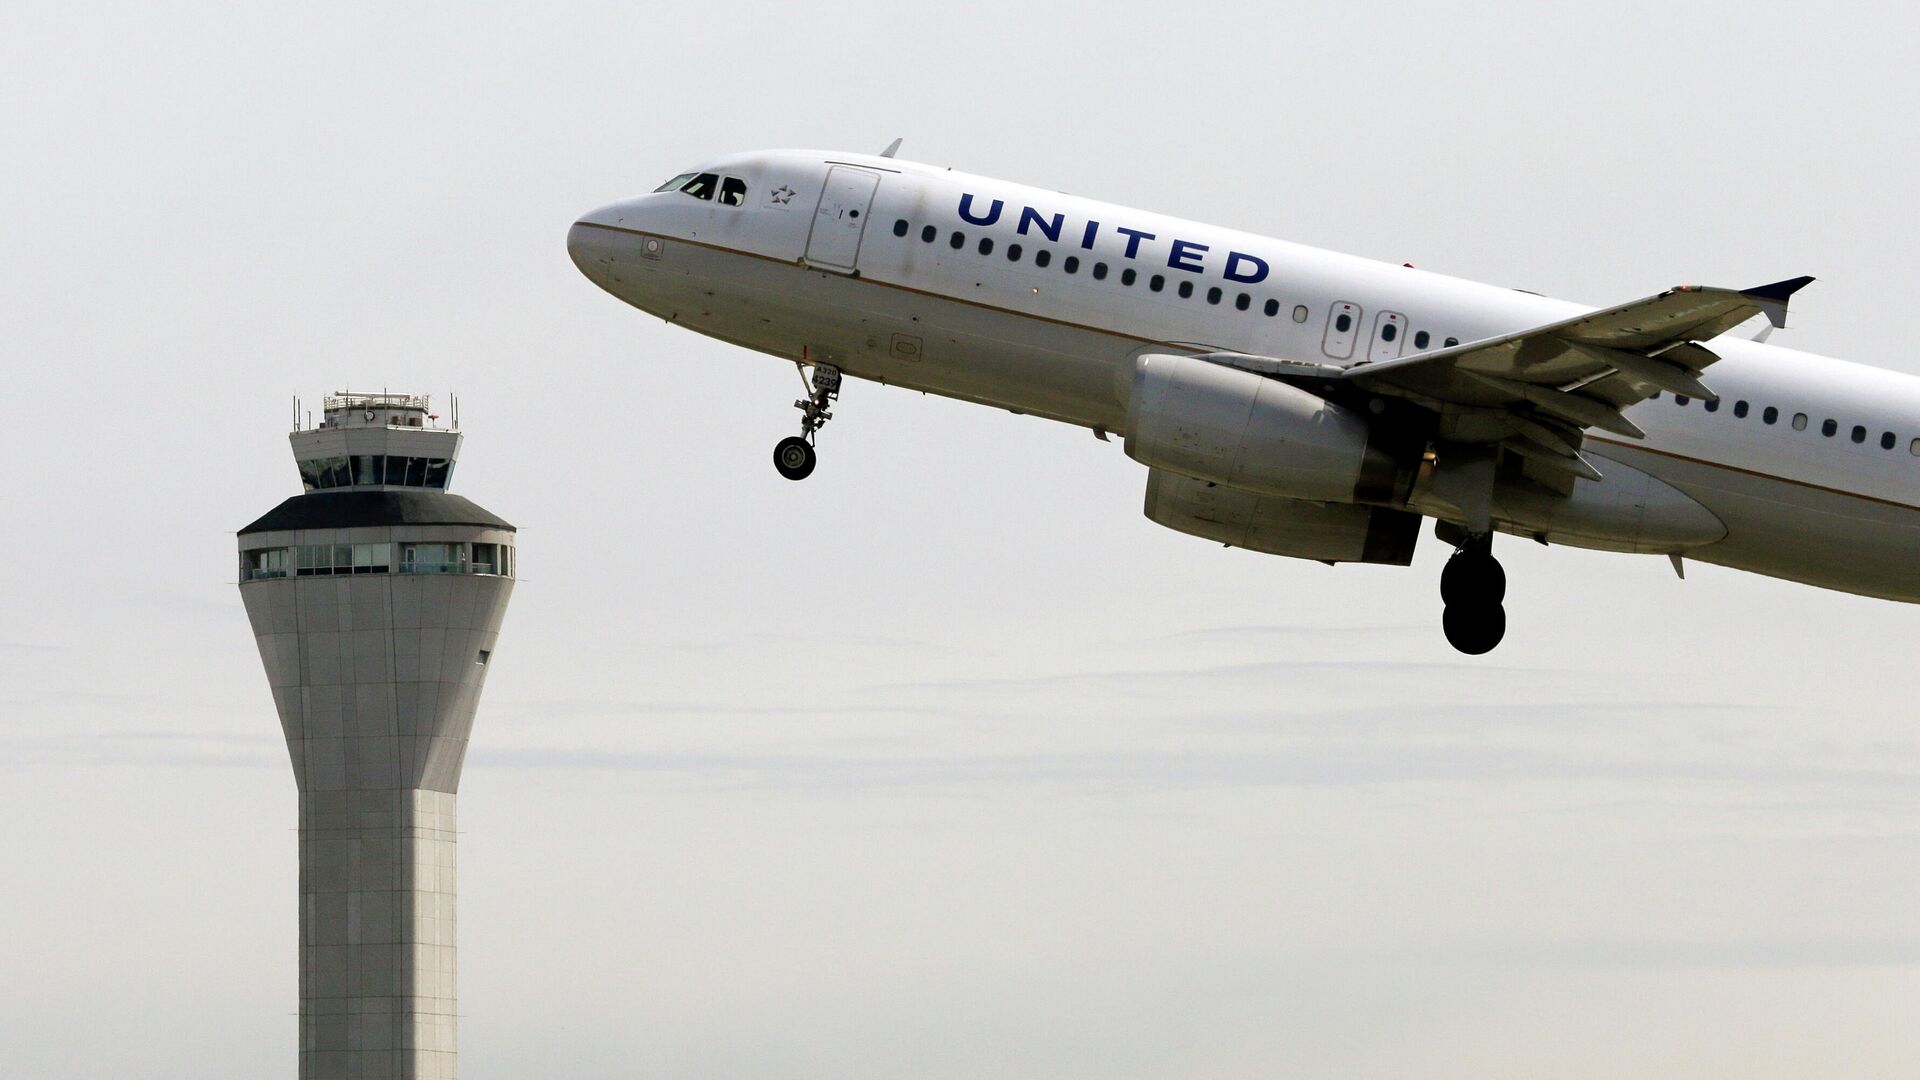 FILE - In this April 23, 2013 file photo, a United Airlines jet departs in view of the air traffic control tower at Seattle-Tacoma International Airport in Seattle - Sputnik International, 1920, 07.01.2022